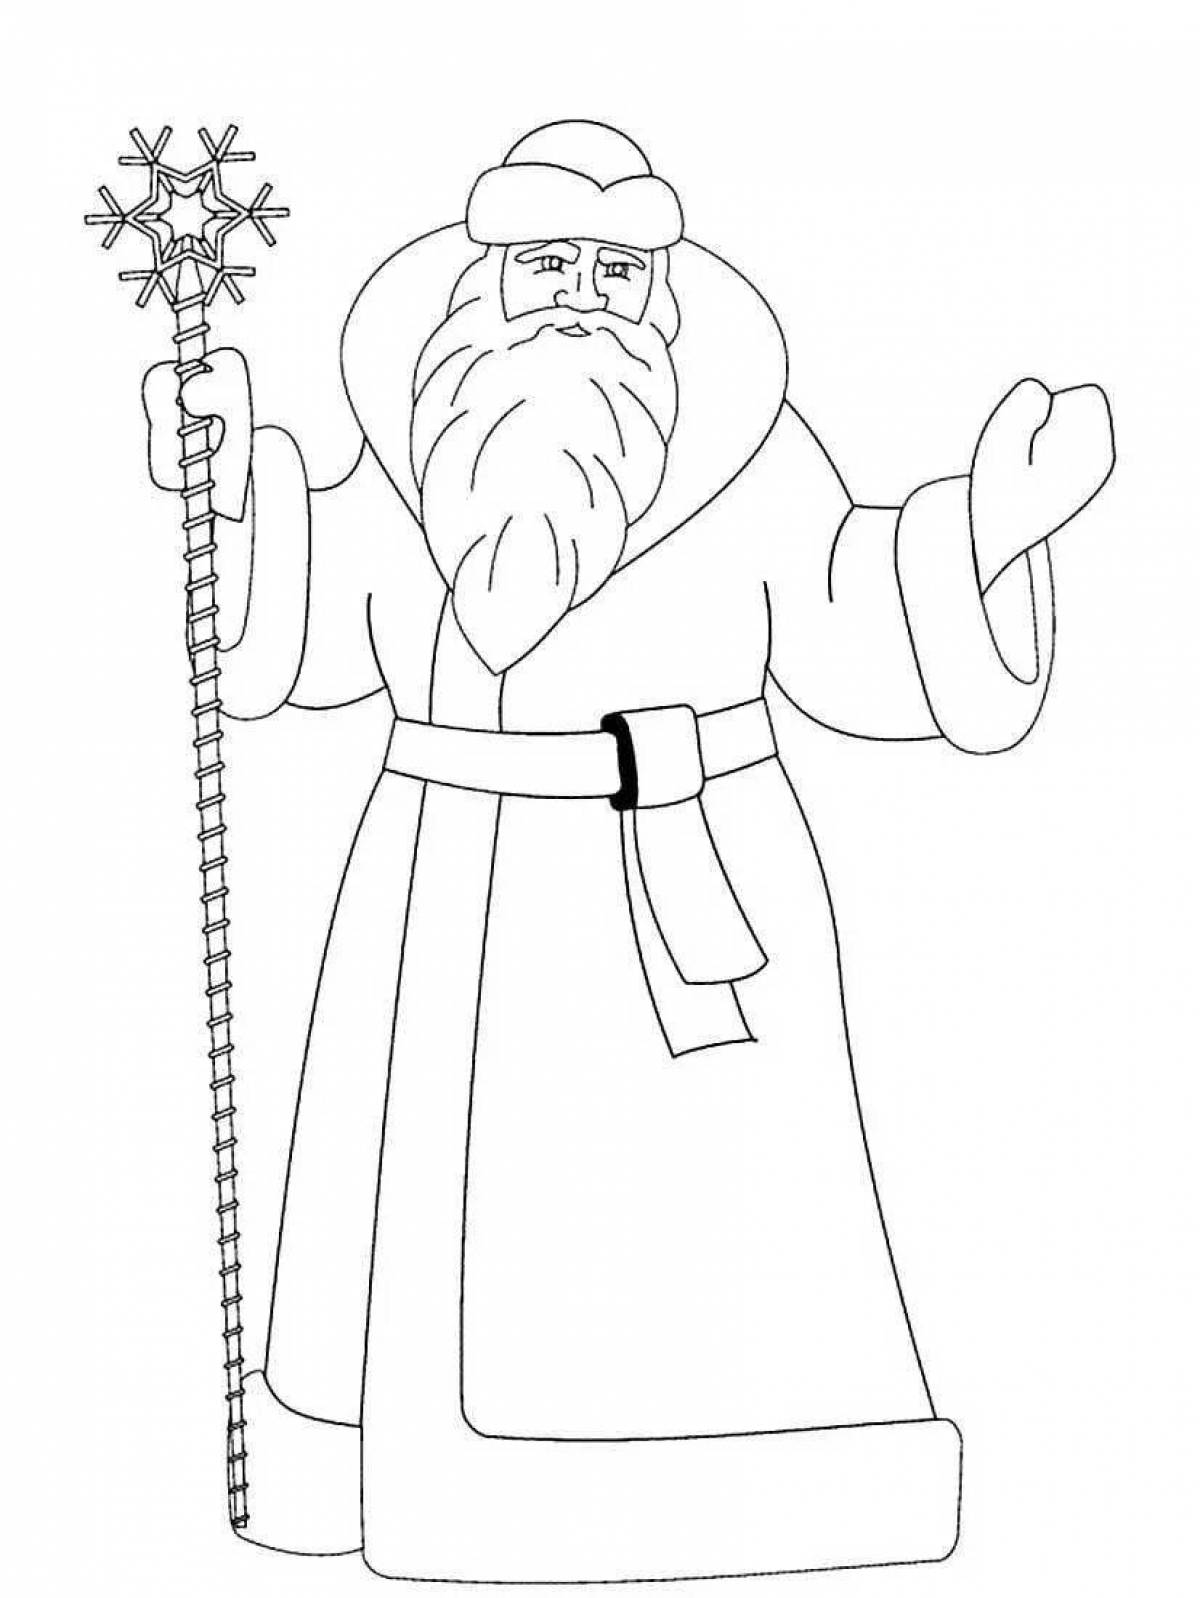 Gorgeous governor frost coloring page